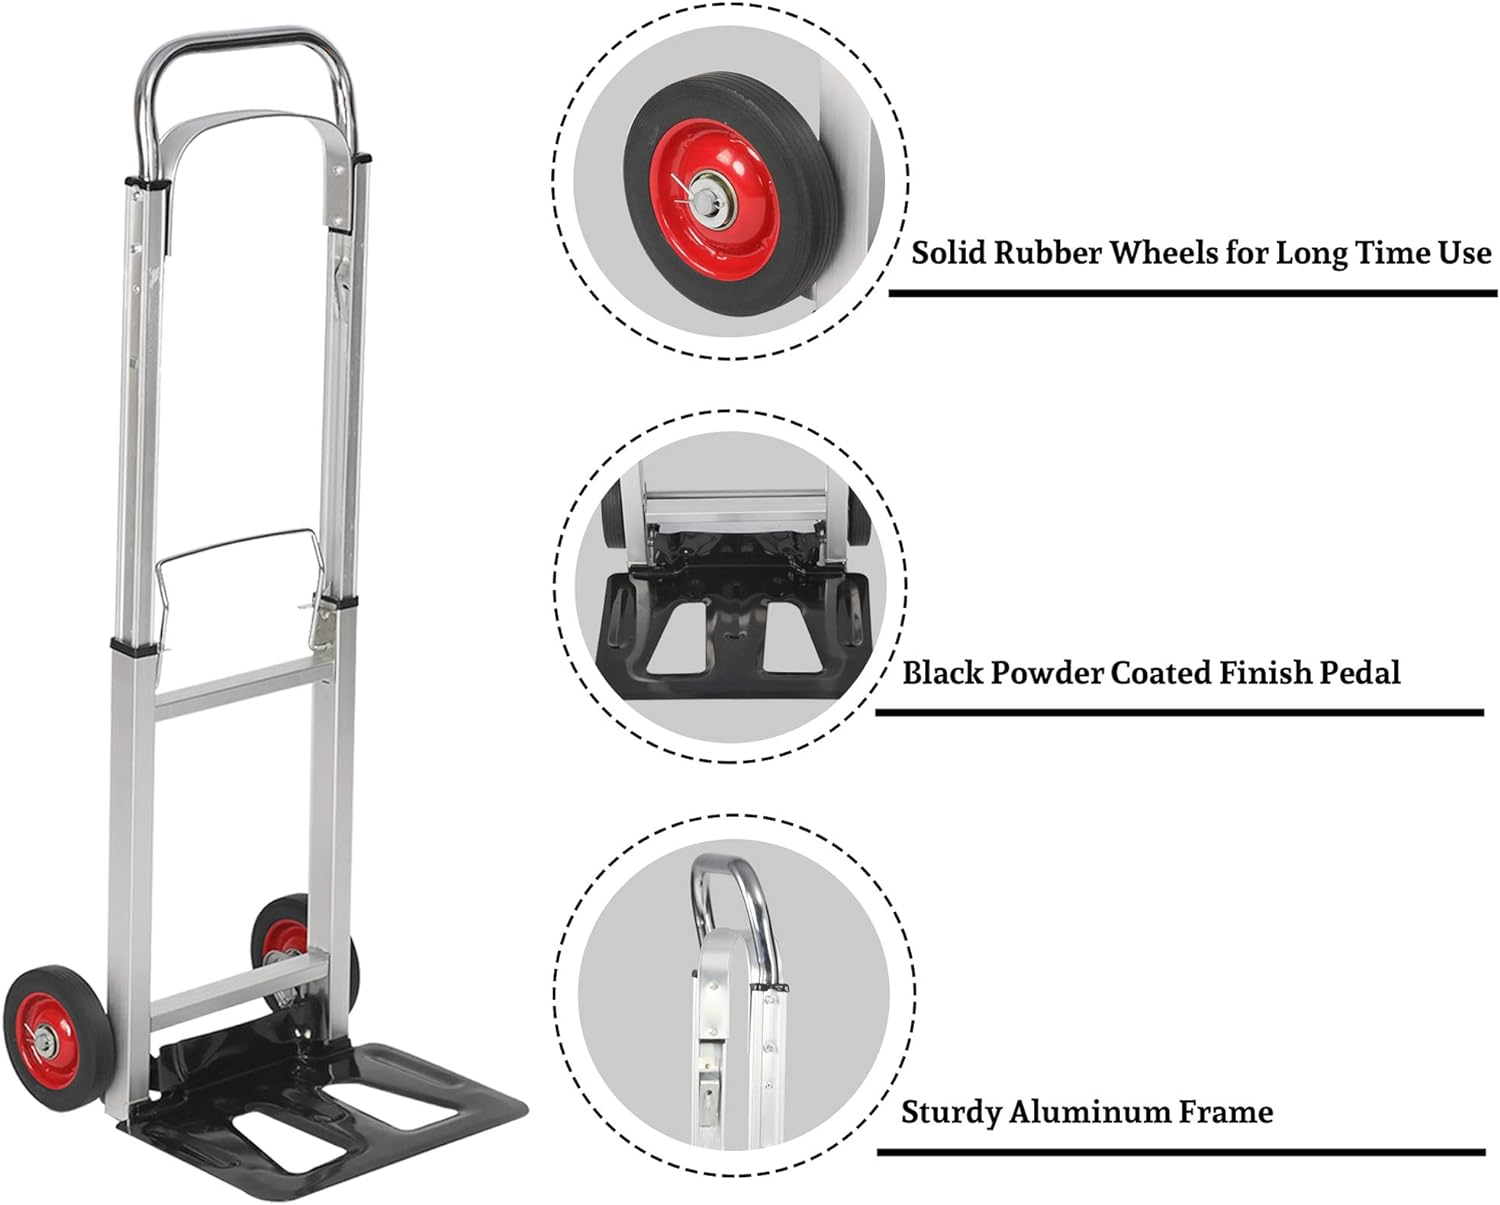 Hand Truck Dolly Portable Aluminum Folding Compact Trolley Luggage Cart with 2 Wheels, 330lbs Capacity